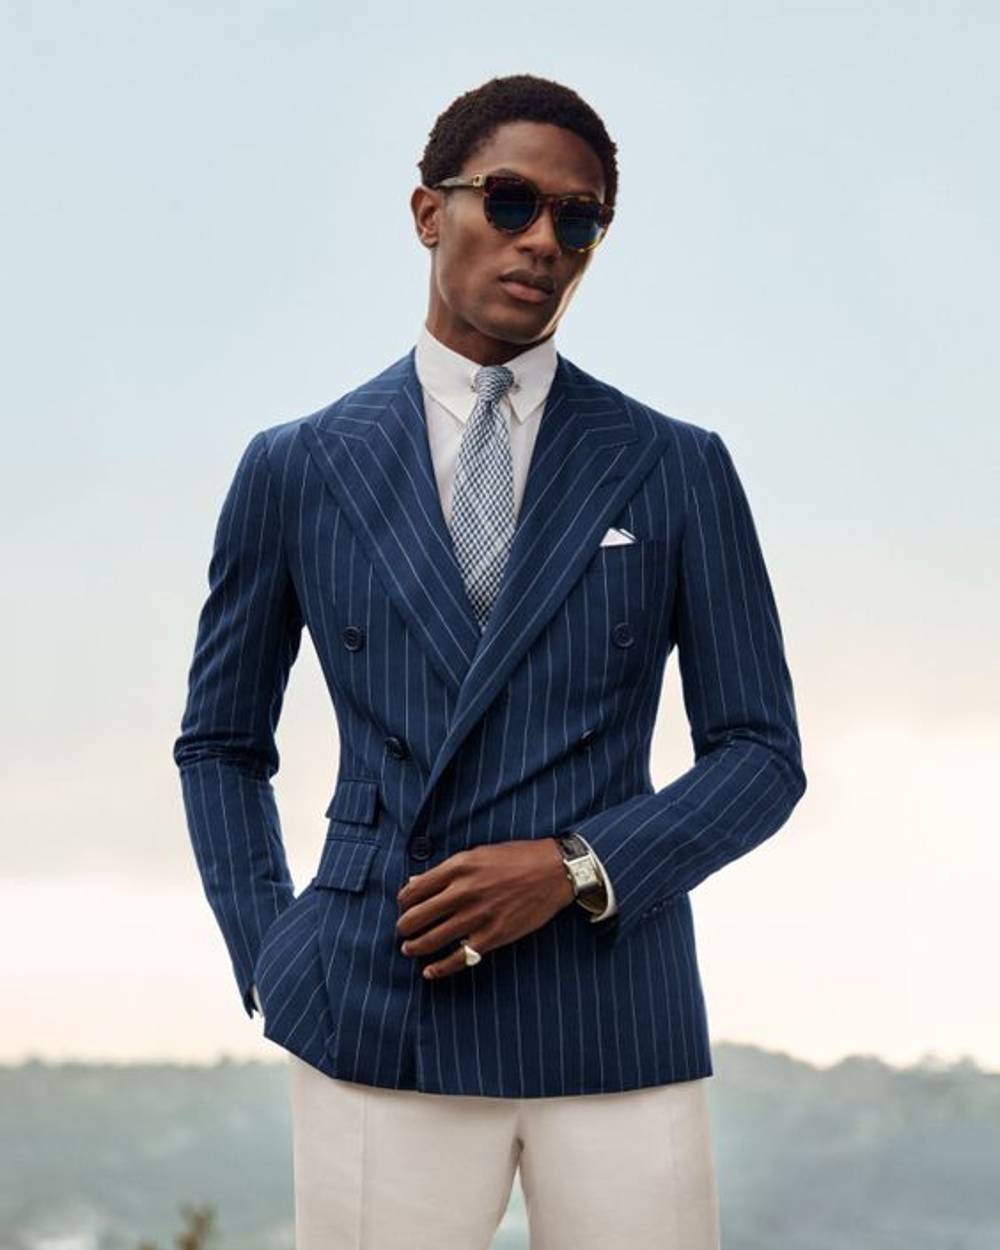 Black male model in old money style, double breasted navy blazer, repp tie, white oxford shirt, classic leather strap watch, silk picket square